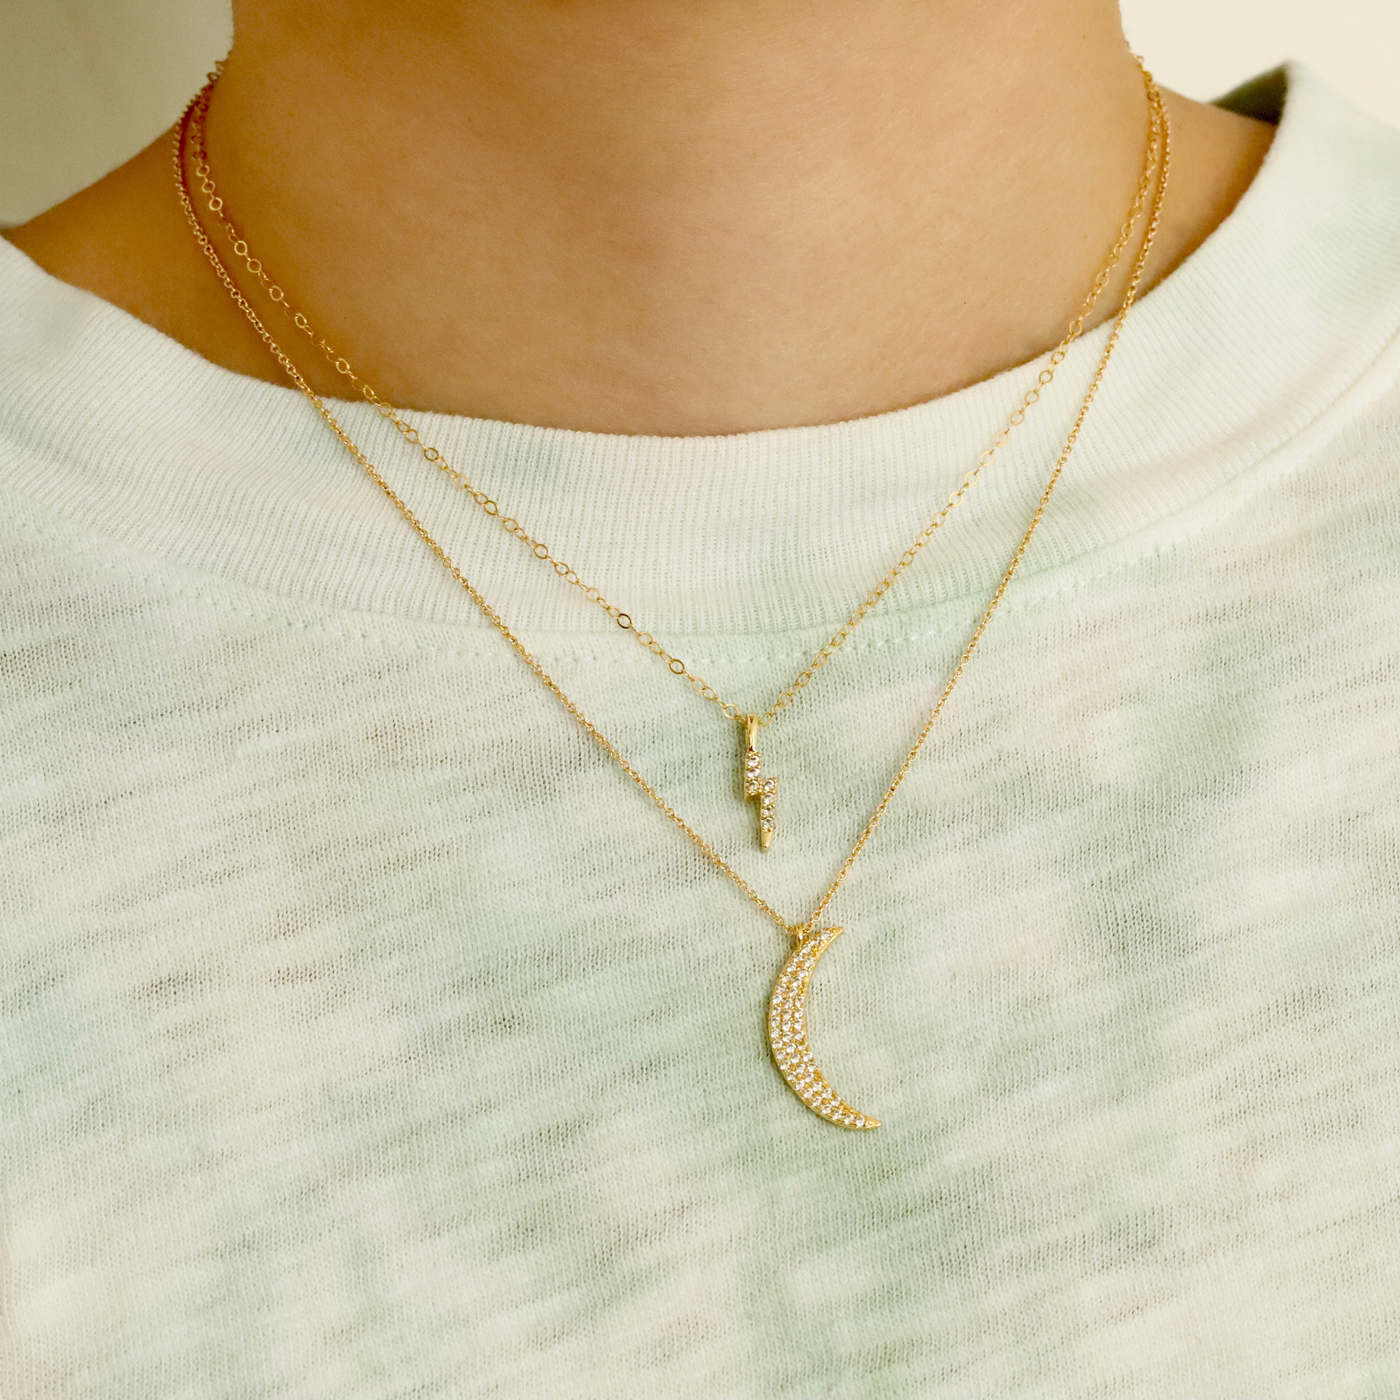 Woman wearing moon pendant necklace and thunder bolt necklace